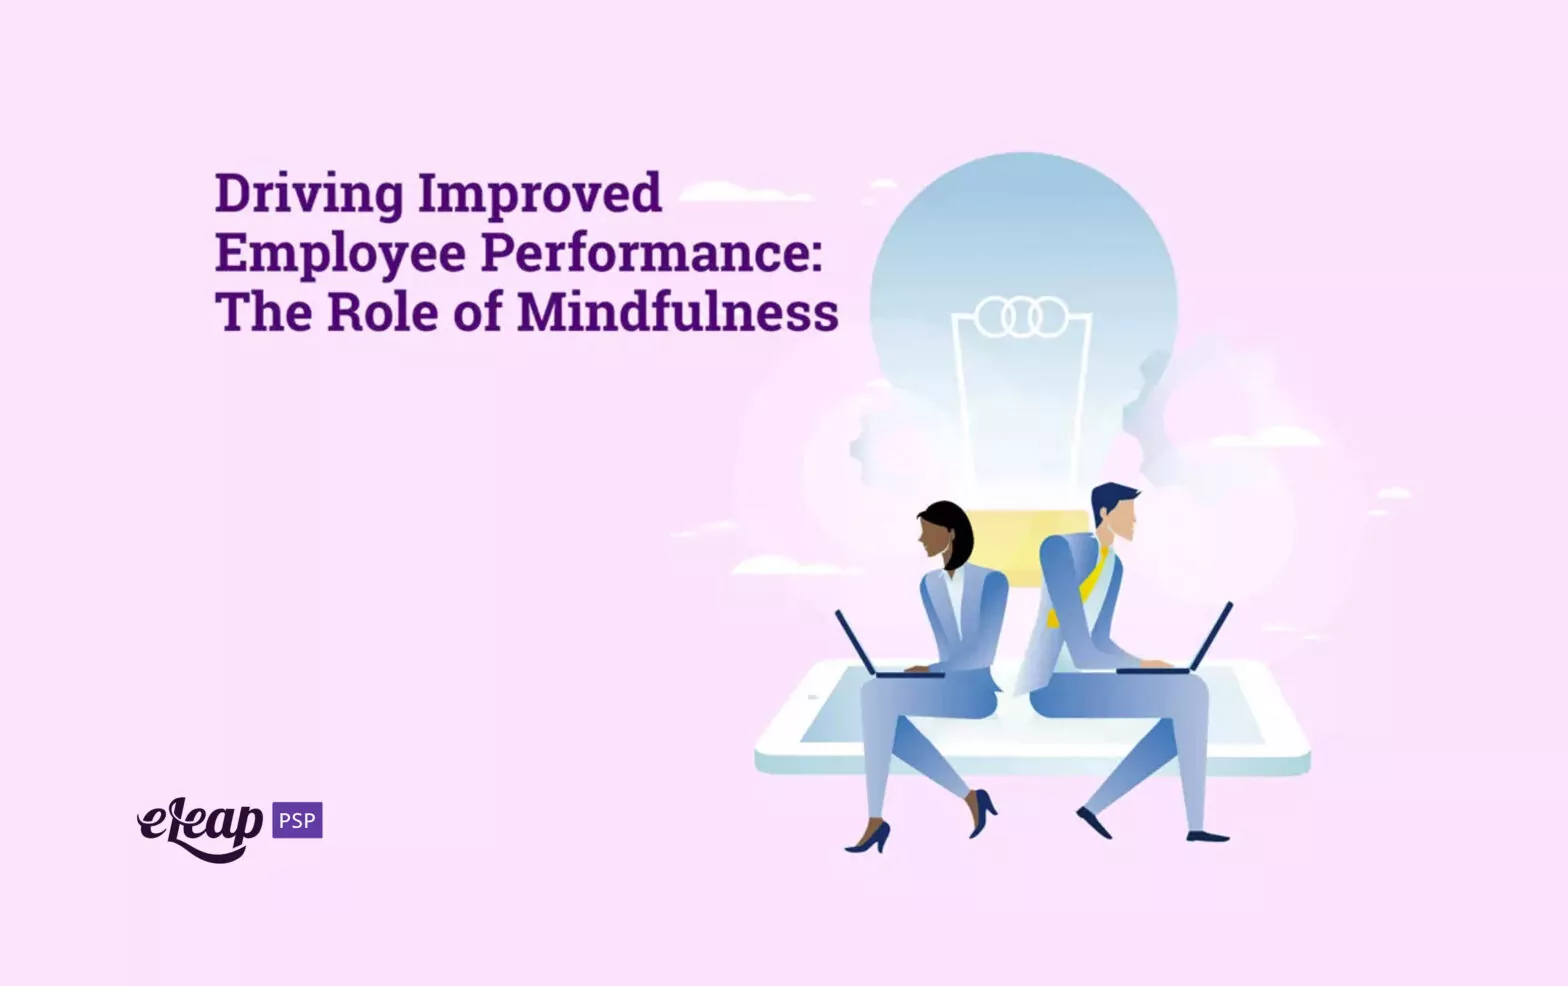 Driving Improved Employee Performance: The Role of Mindfulness